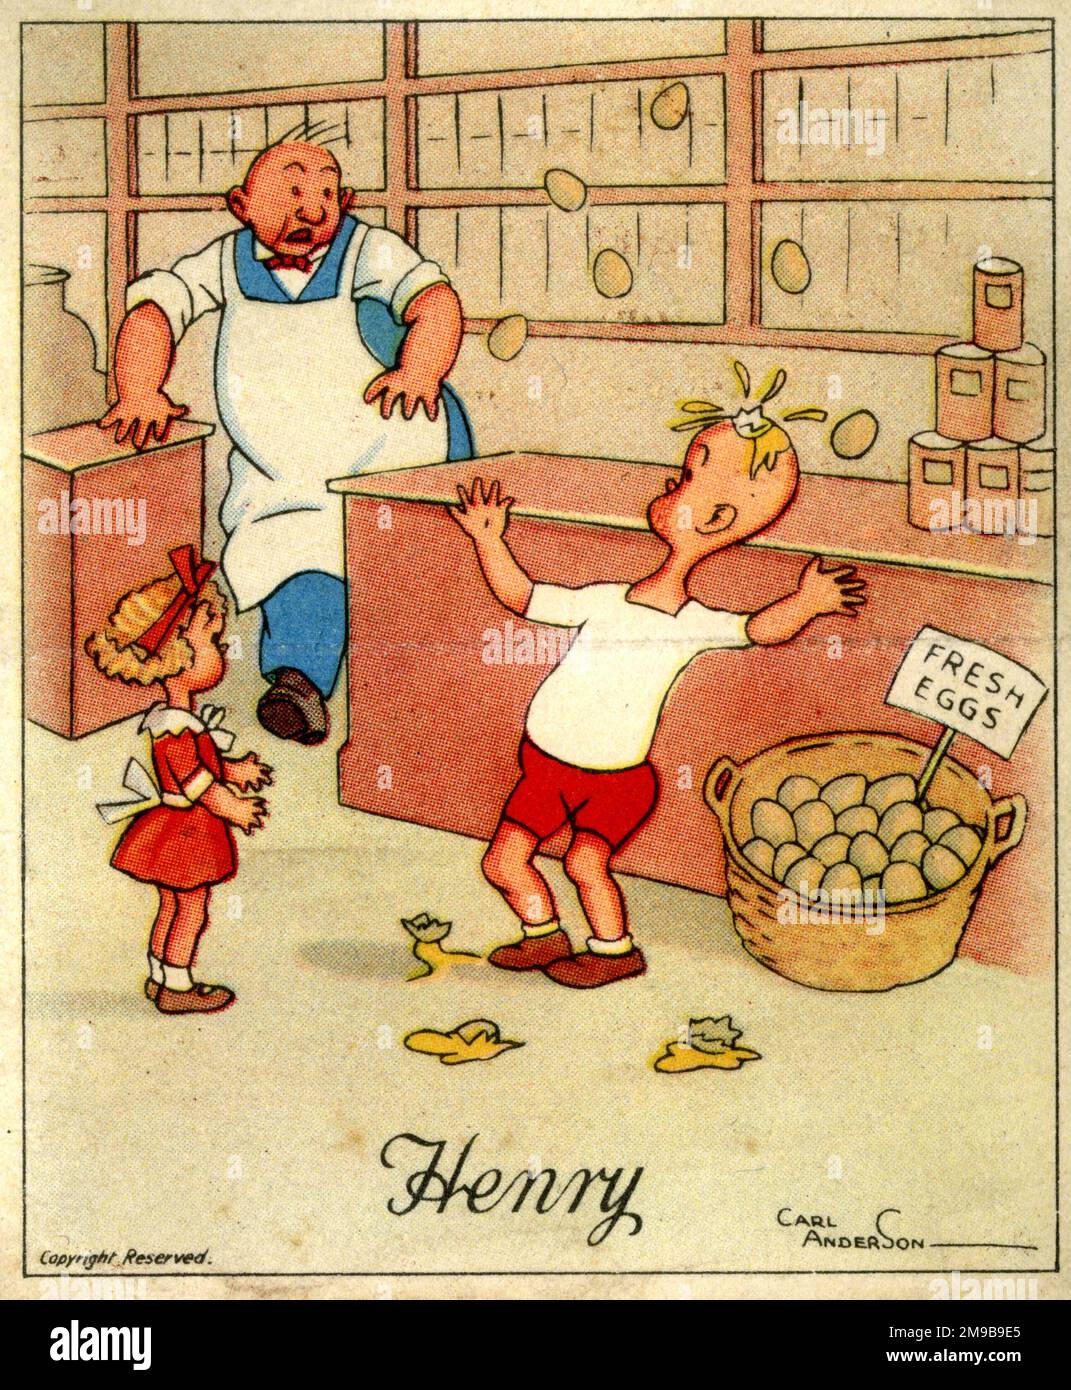 Egg Juggling, Henry cartoon by Carl Anderson Stock Photo - Alamy